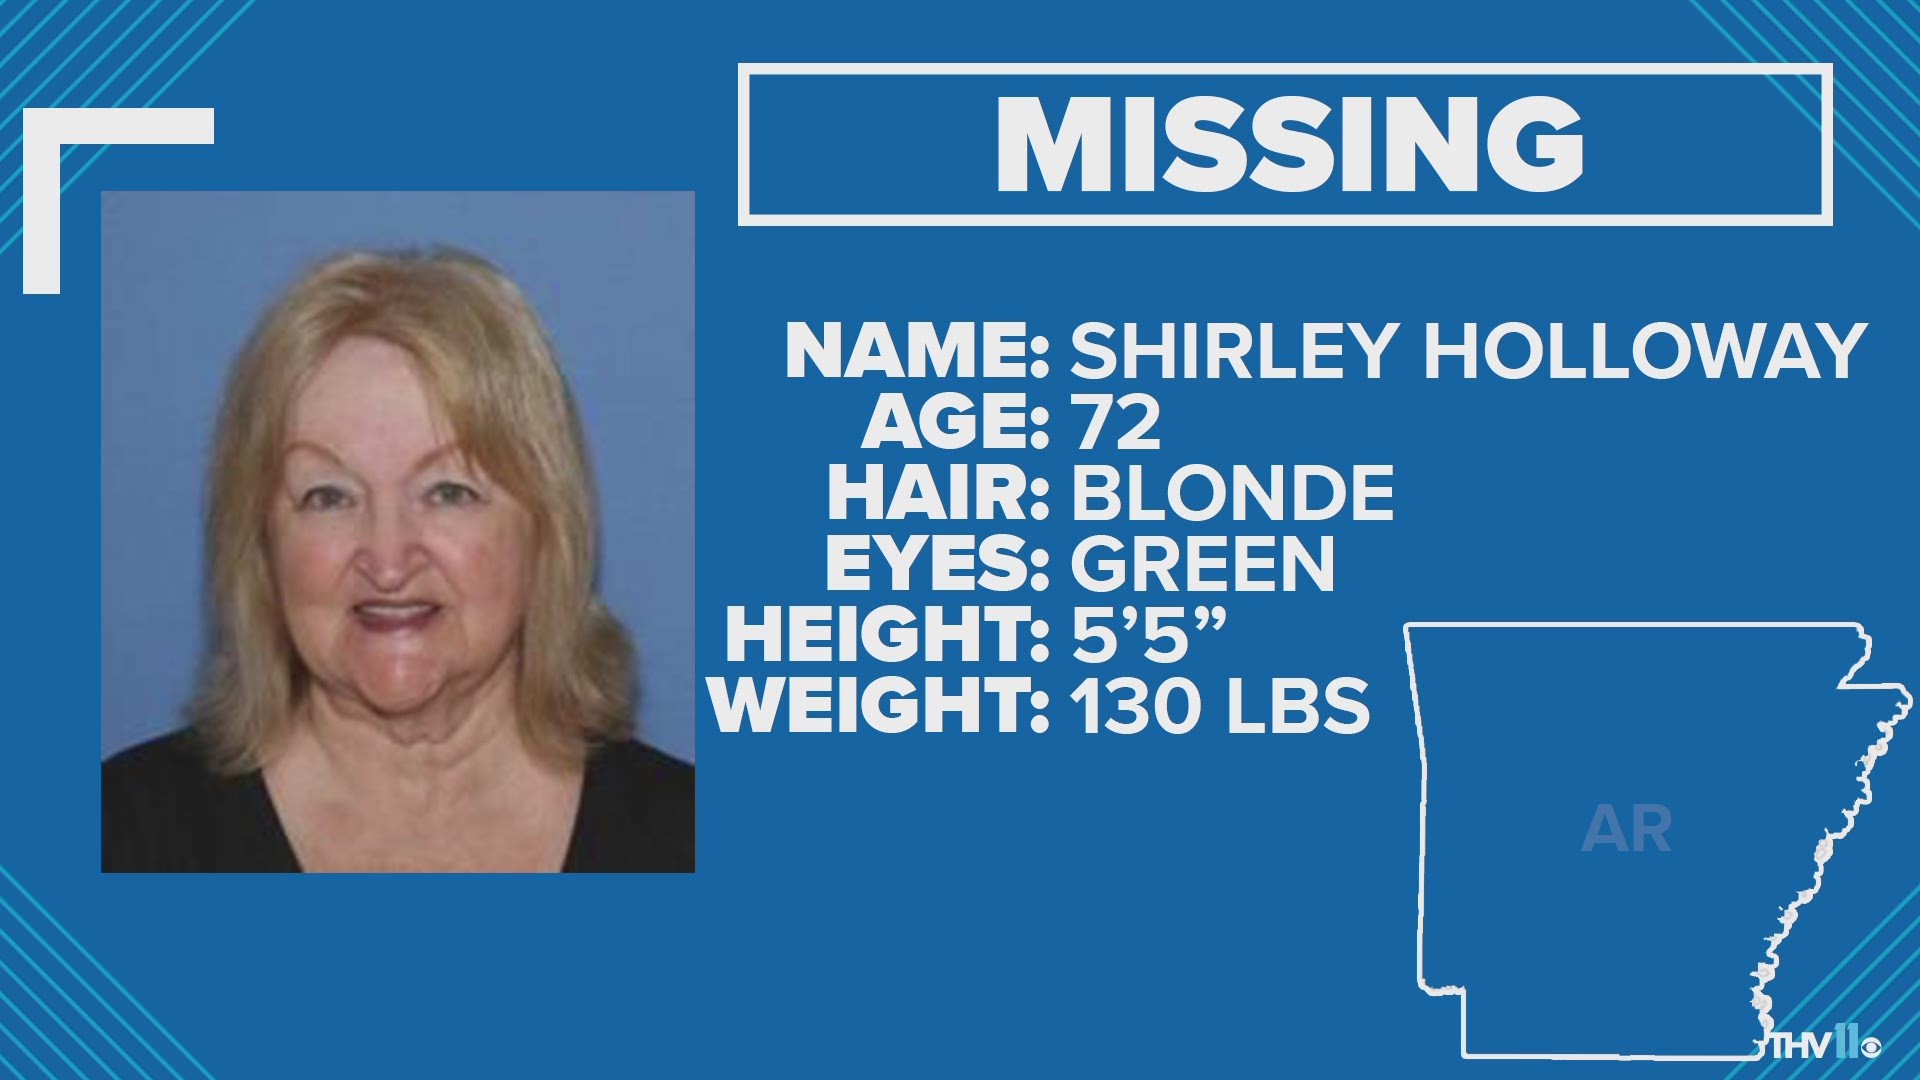 The Glenwood Police Department requested the activation of a Silver Alert for Shirley Holloway of Prescott.